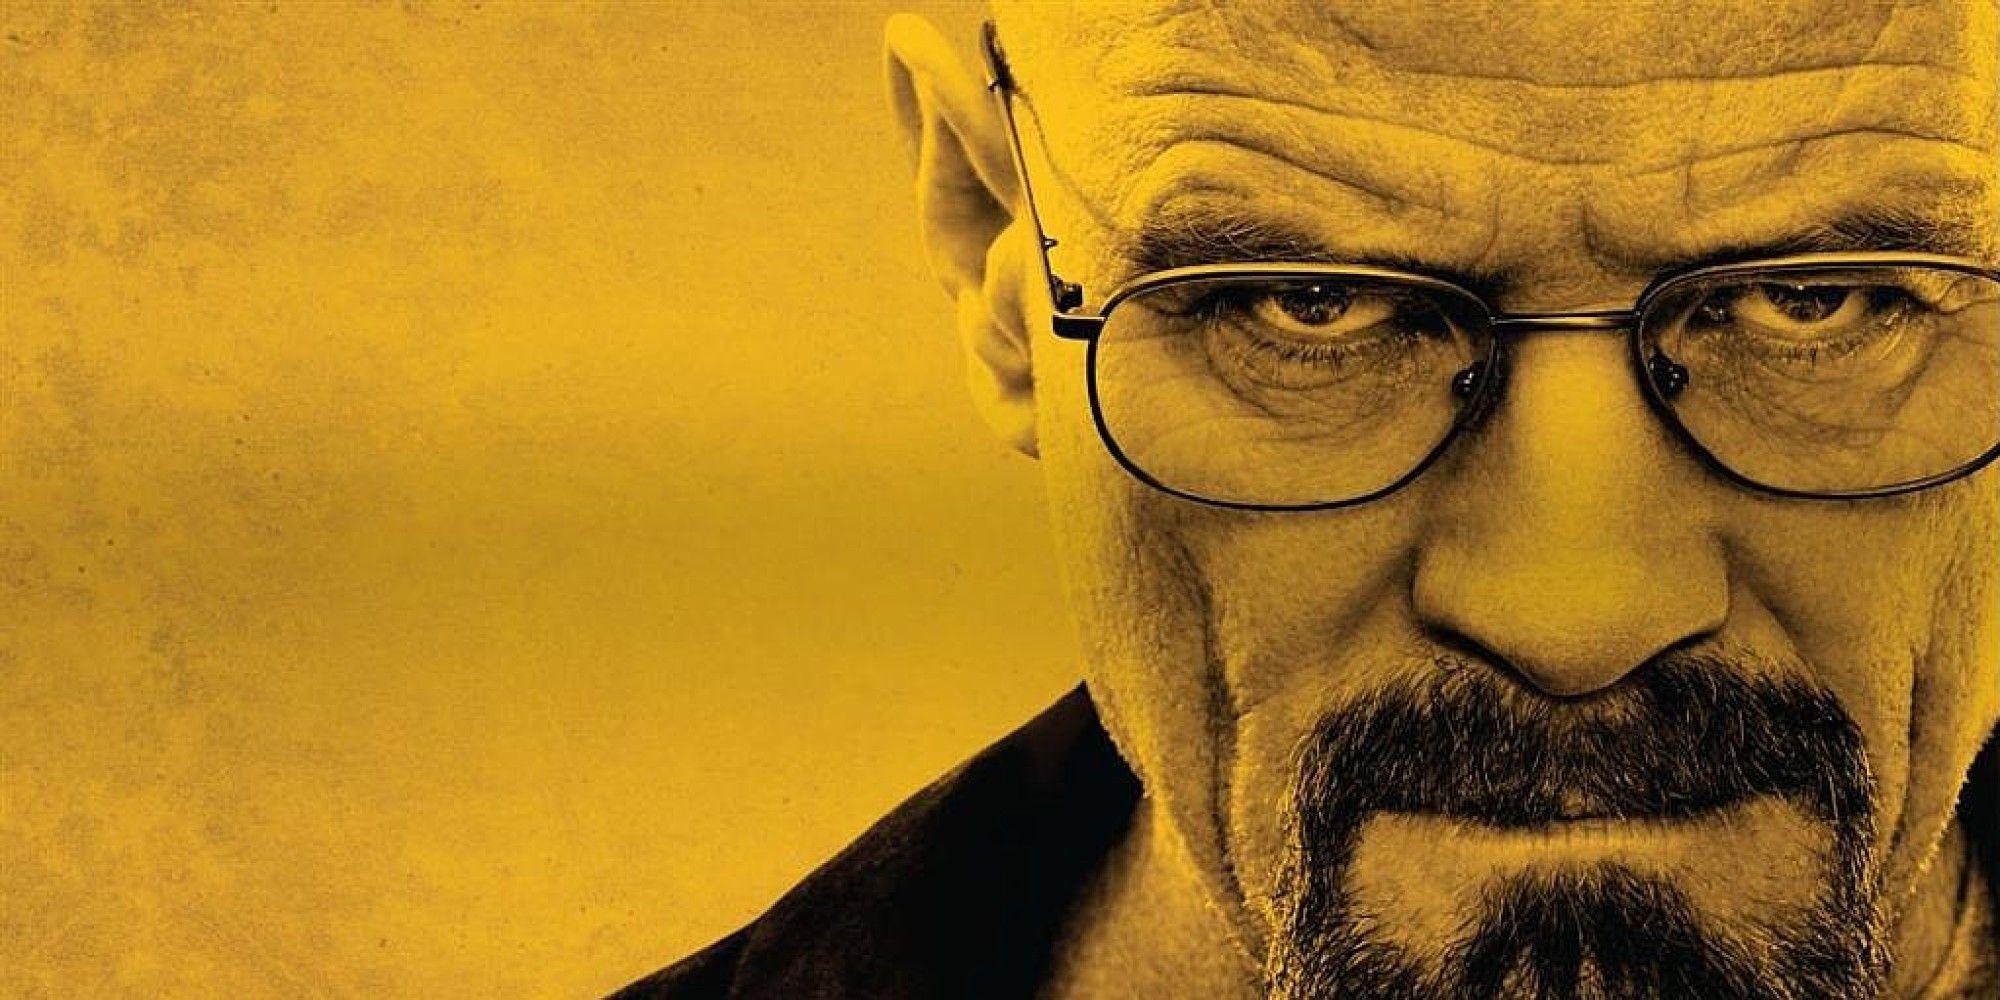 My Experiences and Goals as a Science Advisor for Breaking Bad